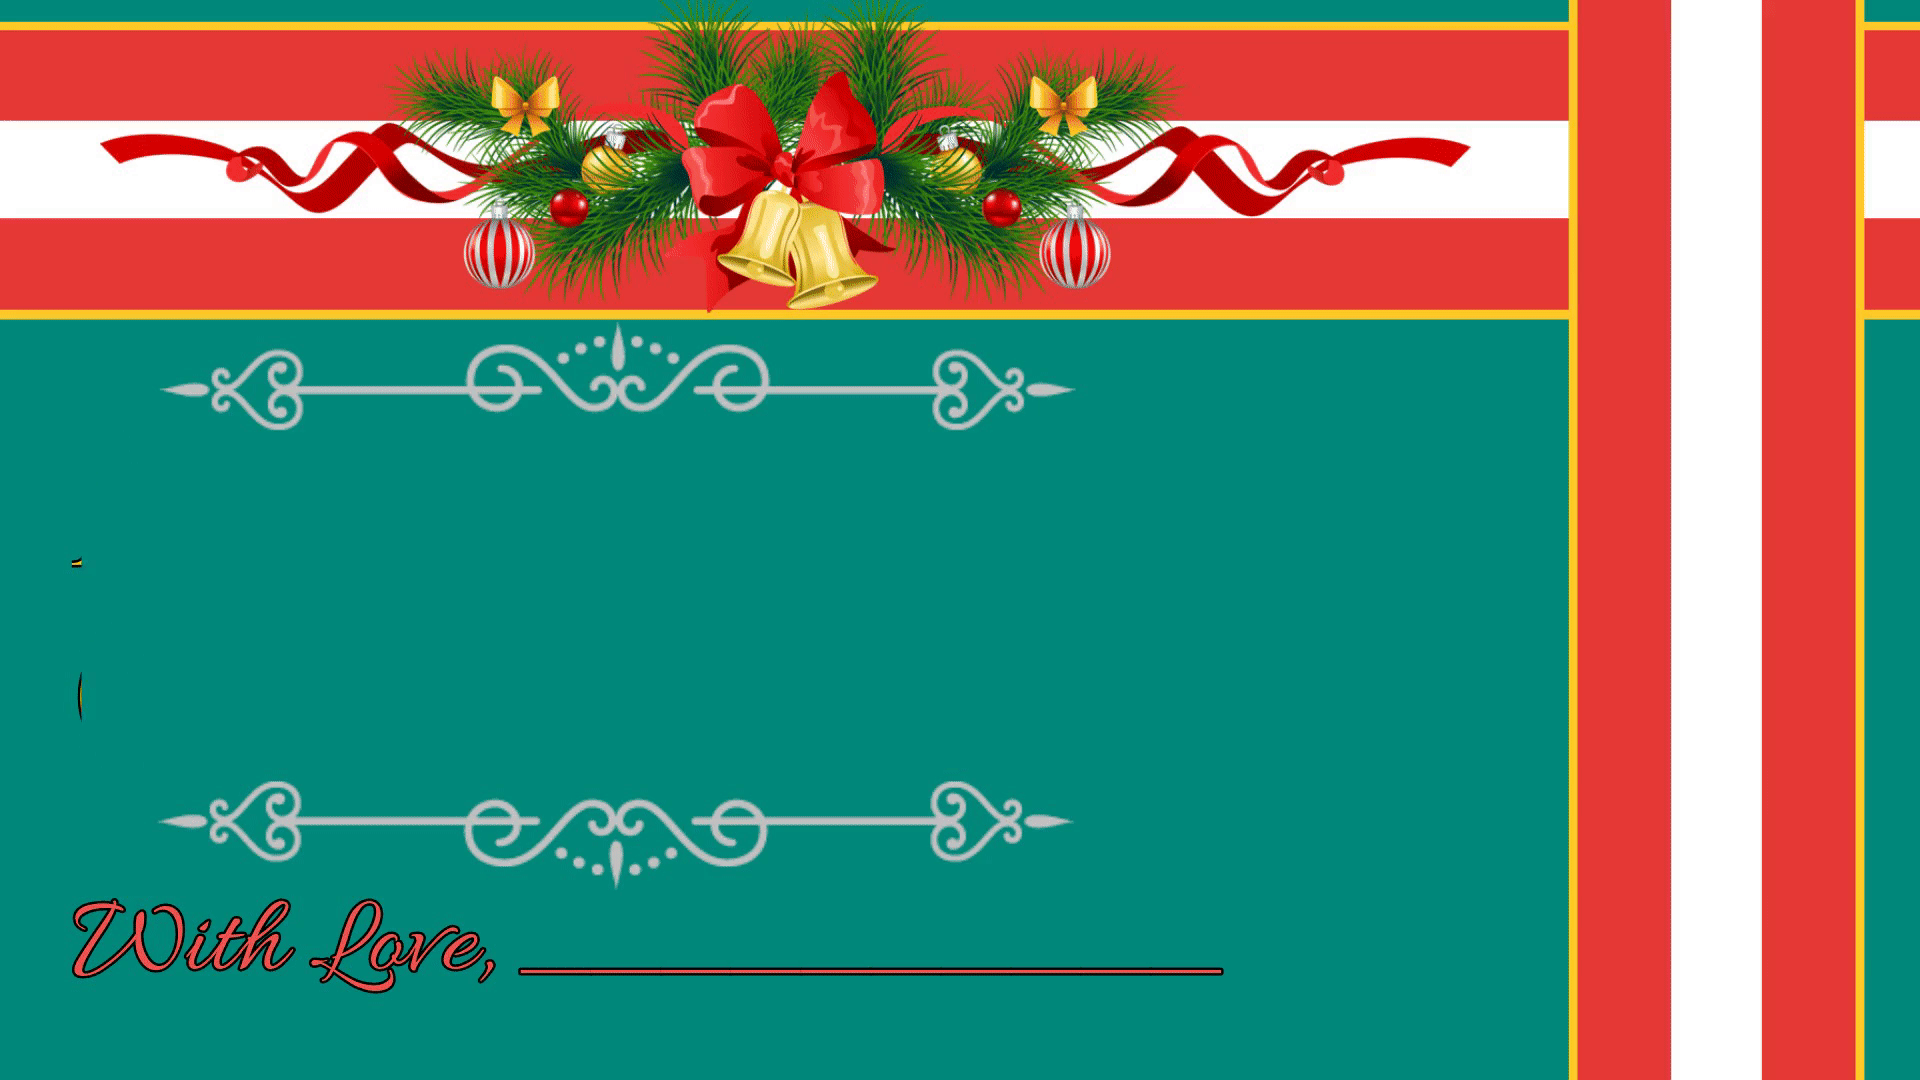 A holiday ecard example, with ribbons and animated text.